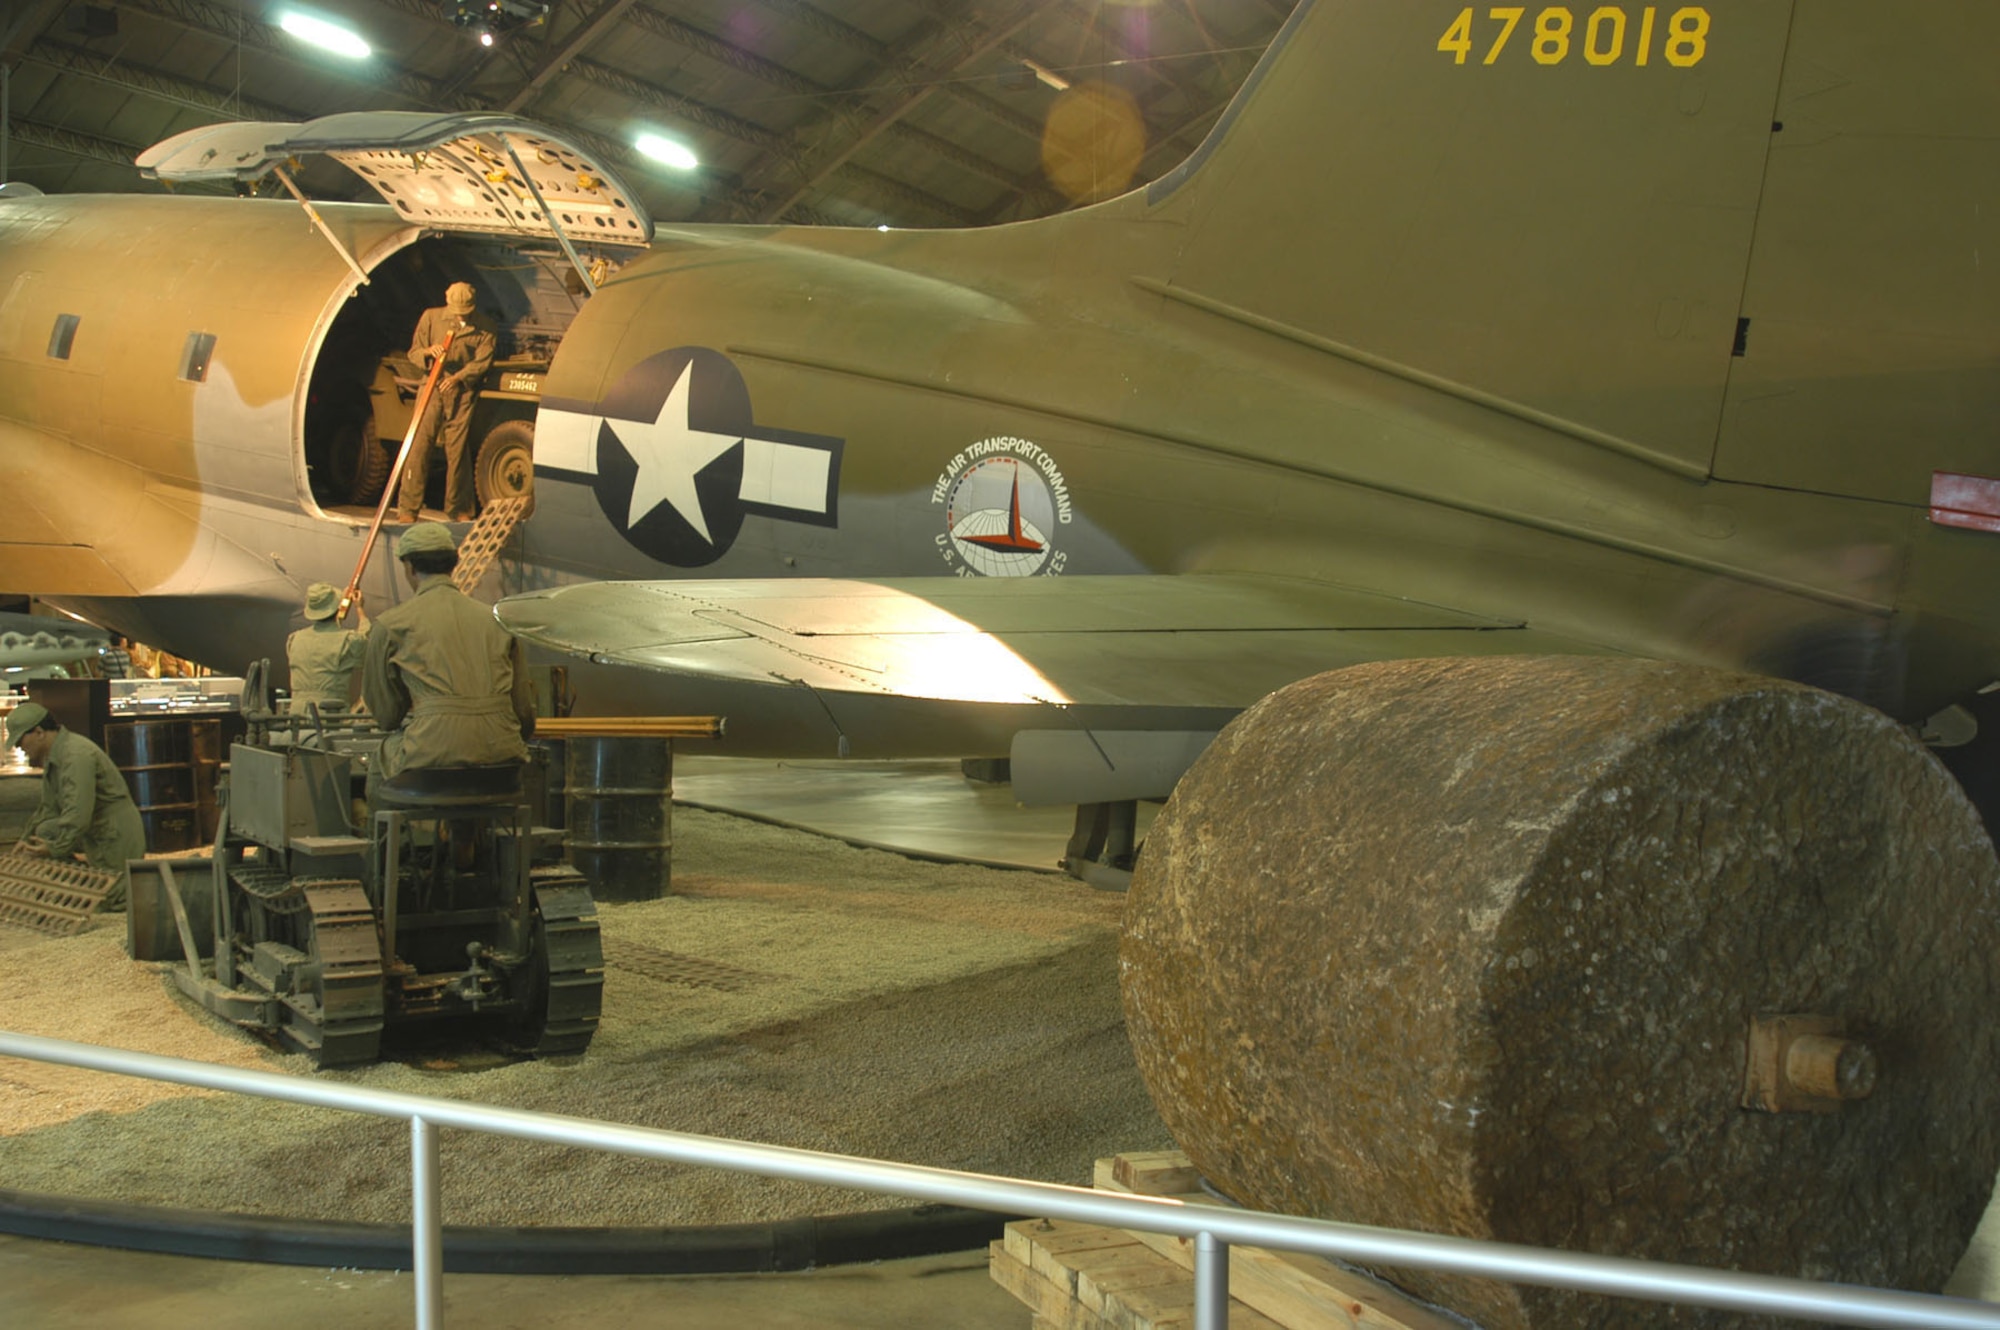 DAYTON, Ohio -- A 10,000-pound stone roller, used to compress gravel runways during World War II, is on display near the Curtiss C-46D in the World War II Gallery at the National Museum of the United States Air Force. (U.S. Air Force photo)